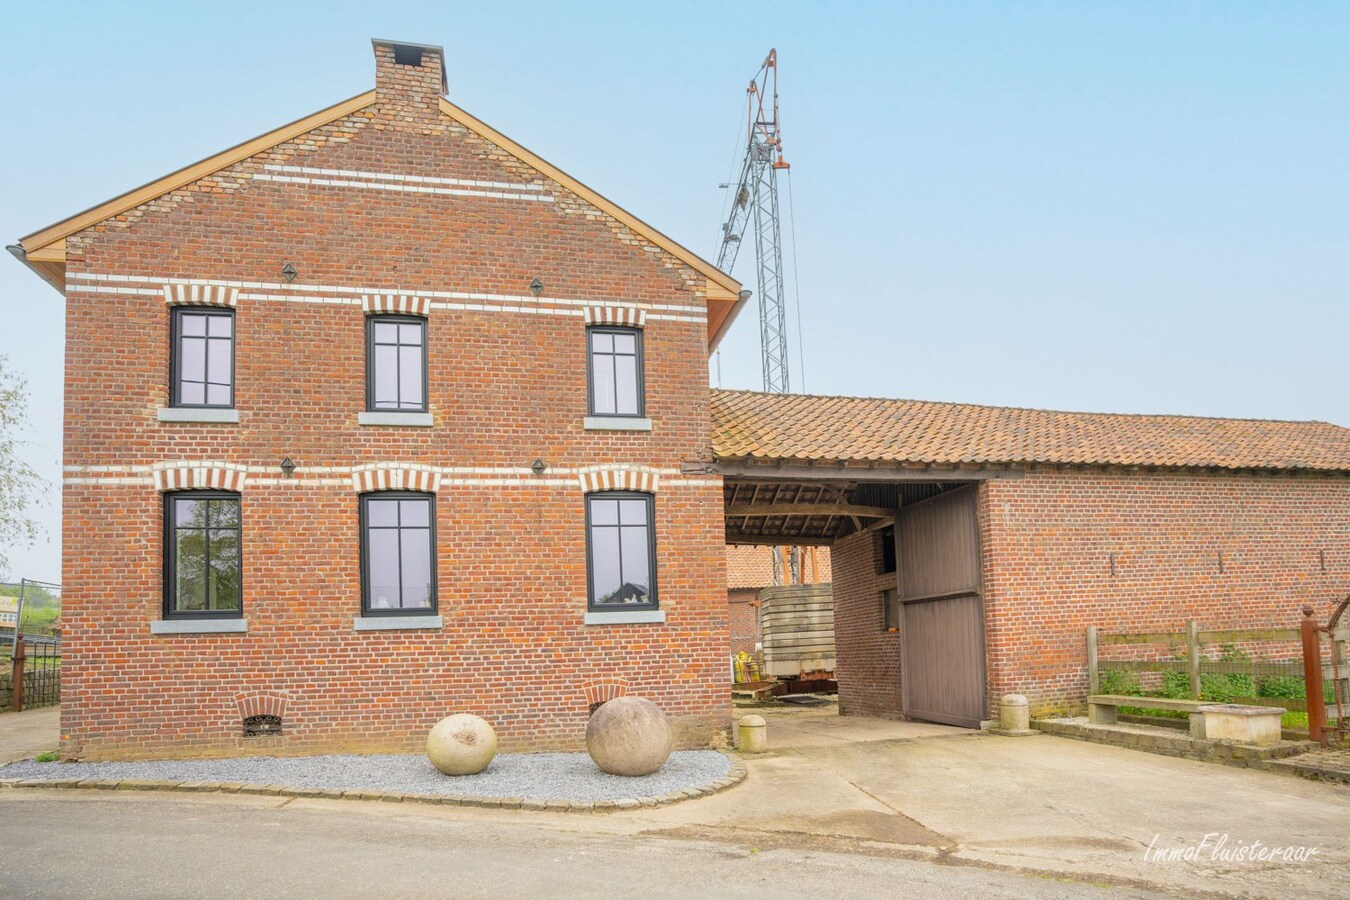 Property sold in Hoeselt